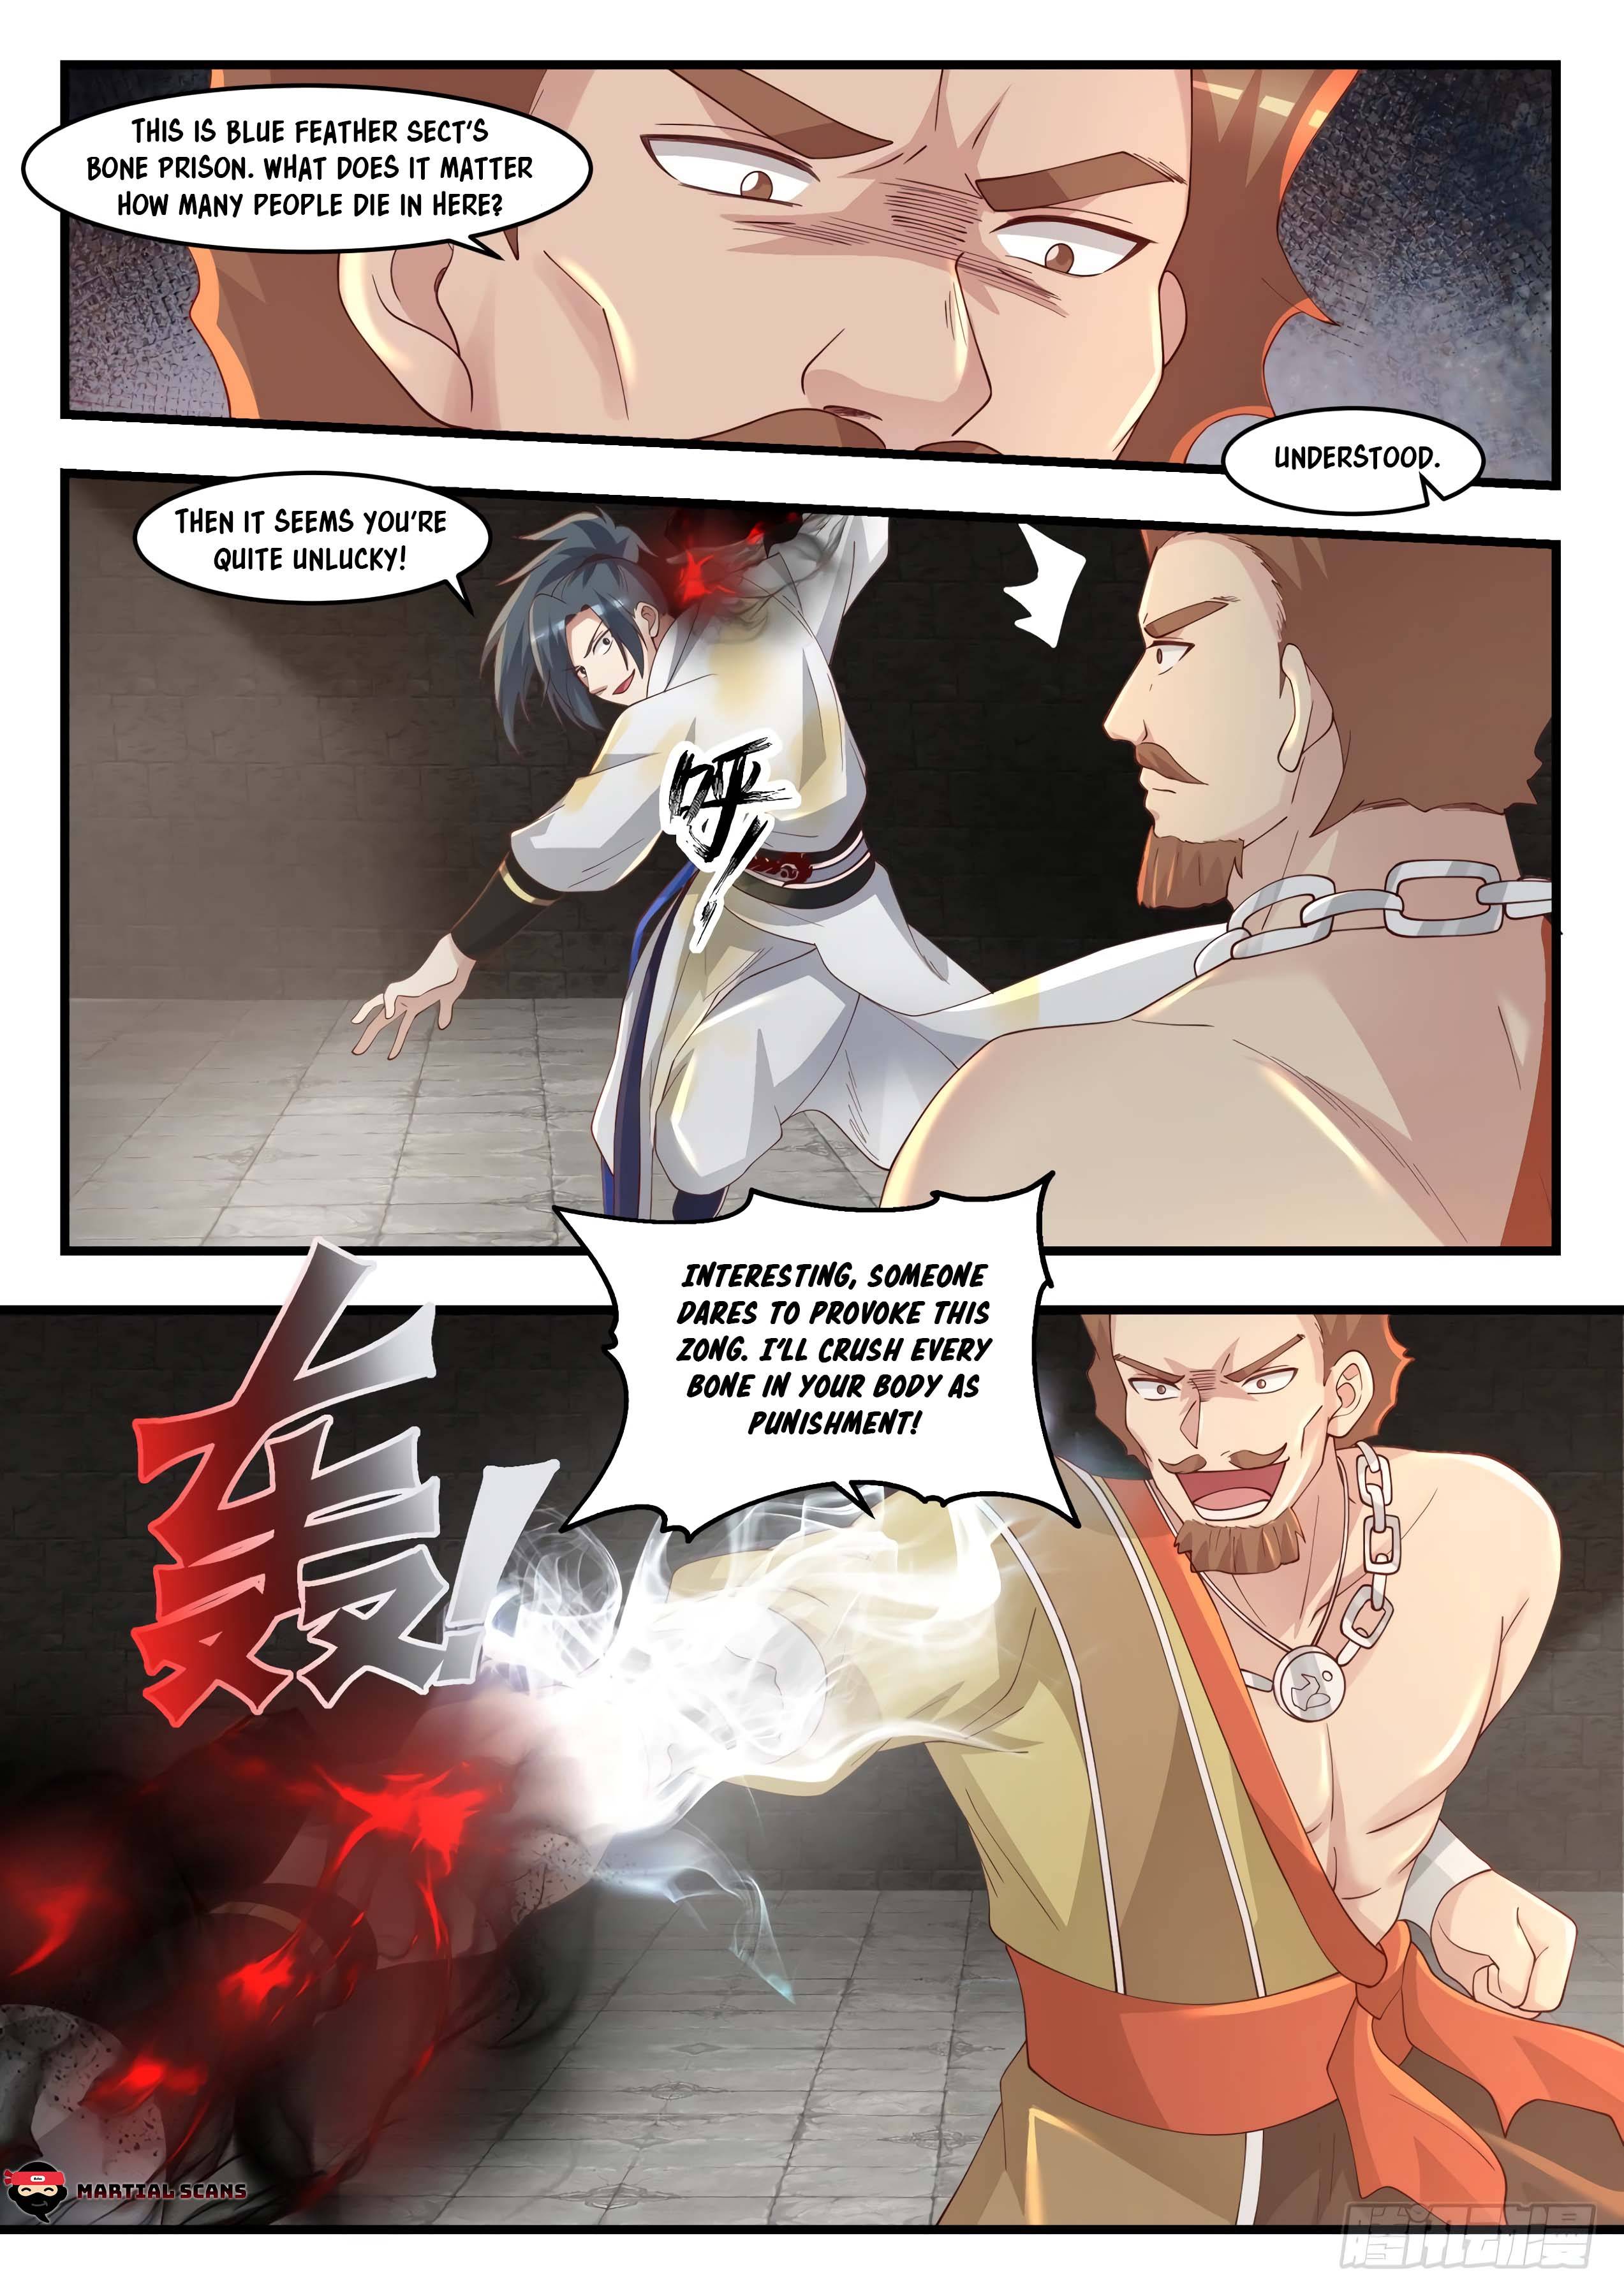 Martial Peak chapter 1560 page 4